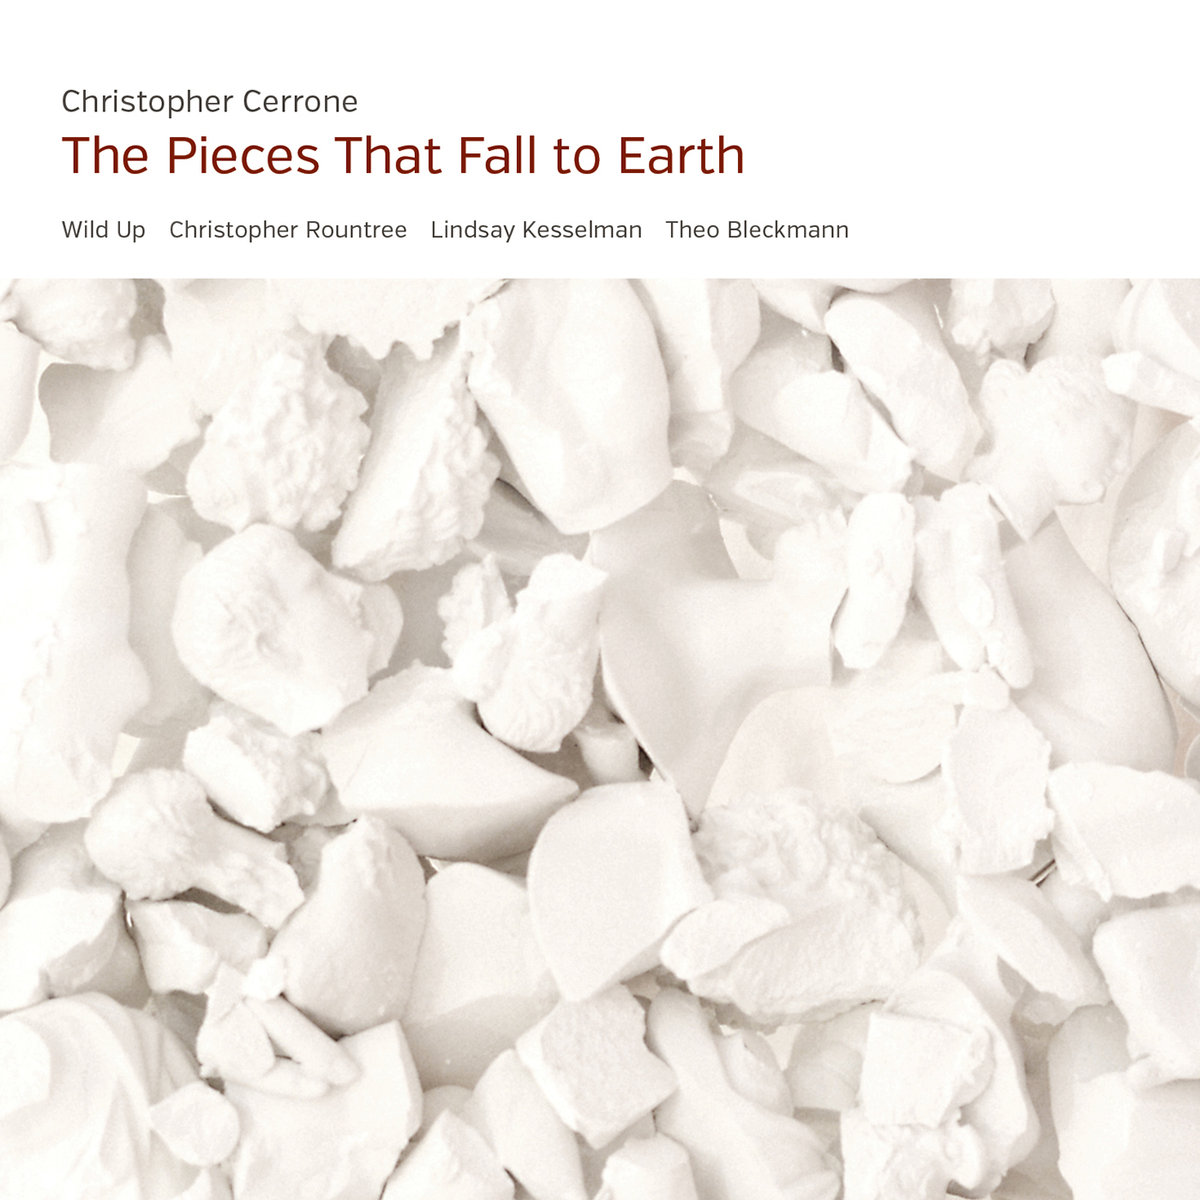 The Pieces That Fall to Earth, album cover